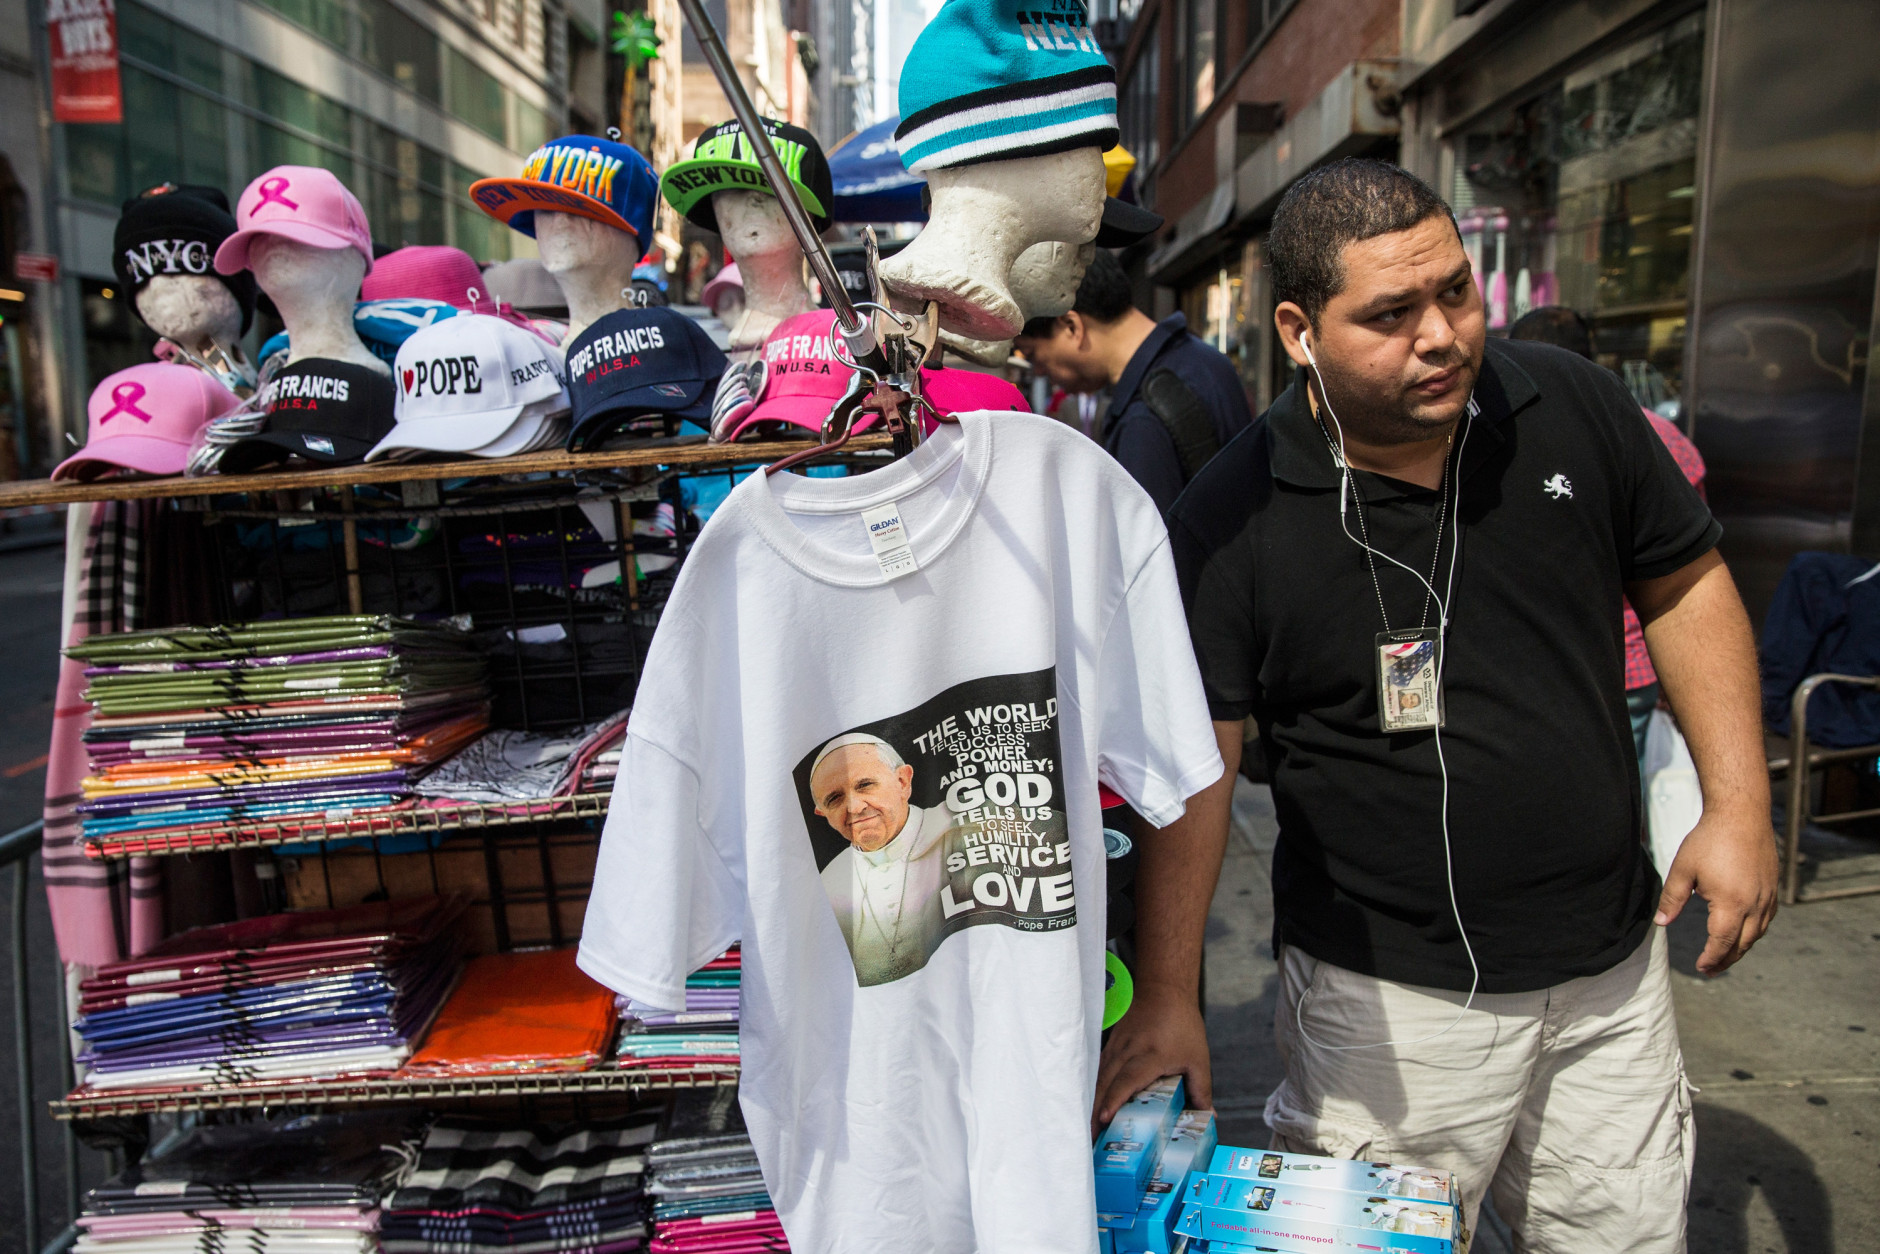 NEW YORK, NY - SEPTEMBER 24:  A man sells Pope Francis paraphernalia in Times Square on September 24, 2015 in New York City.  The Pope will speak tonight at St. Patrick's Cathedral; he is scheduled to land at John F. Kennedy Airport at 5P.M. this evening.  (Photo by Andrew Burton/Getty Images)